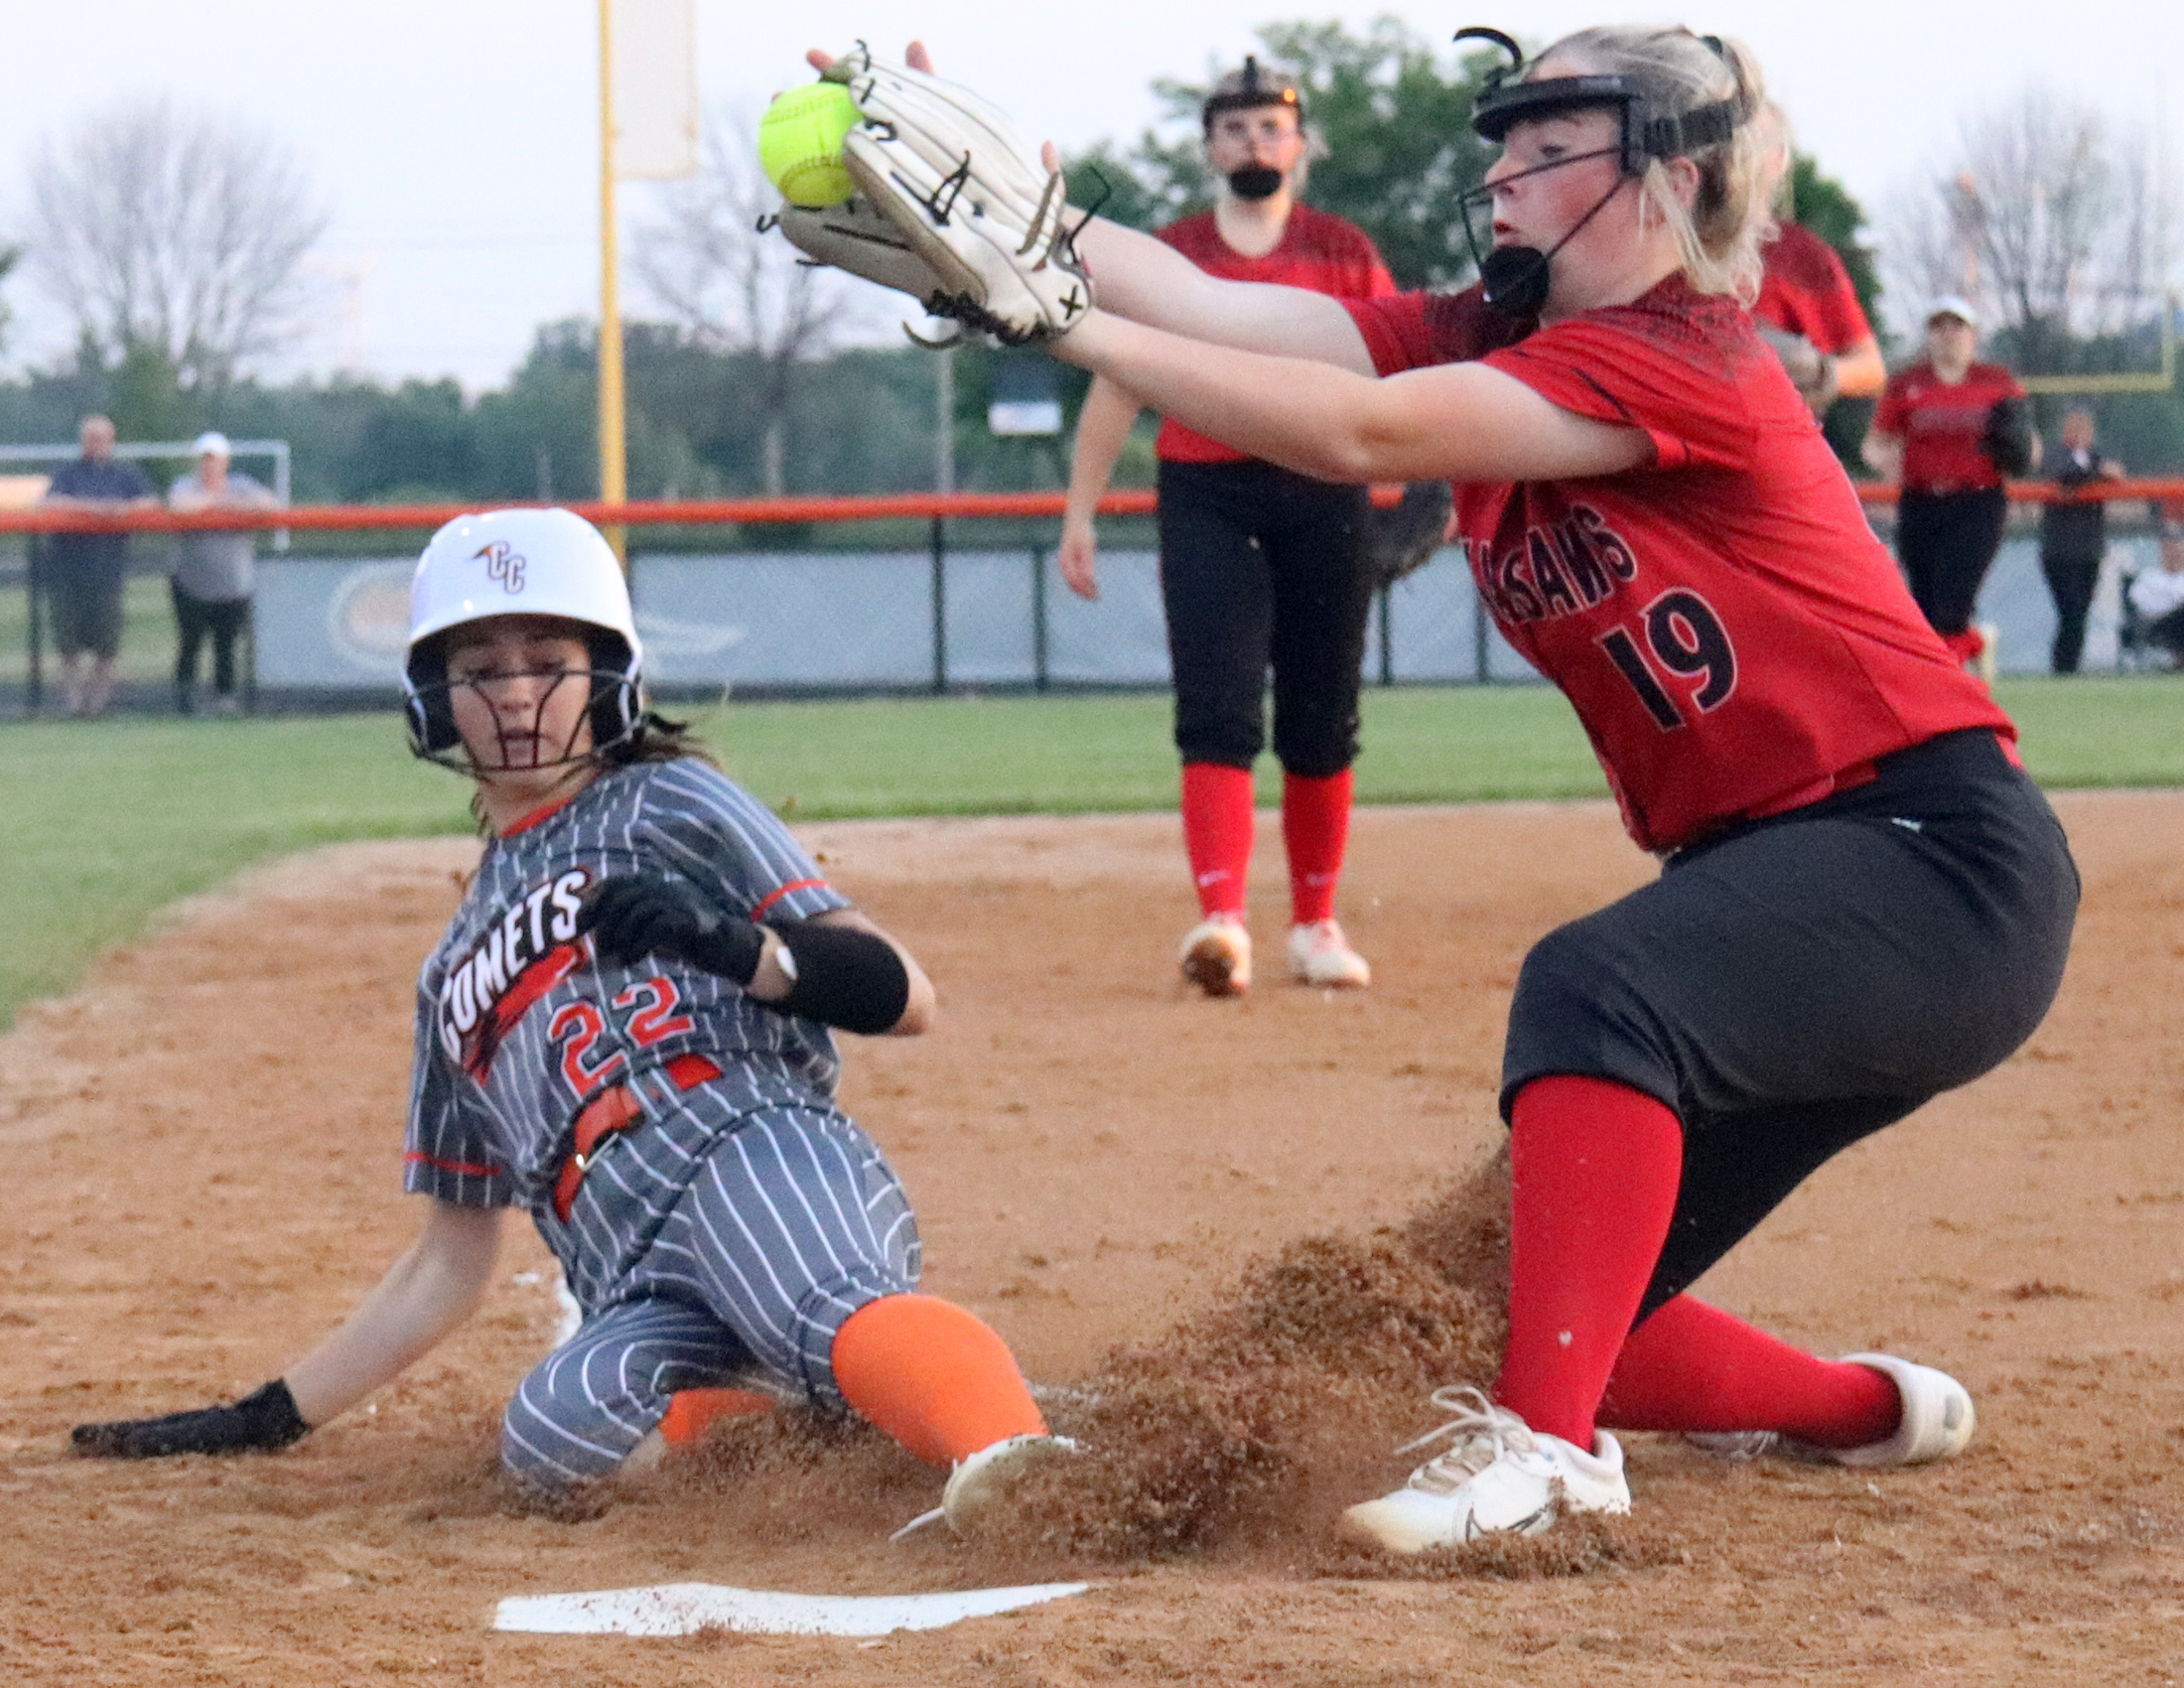 Comets get back on track with 10-3 win over Chickasaws